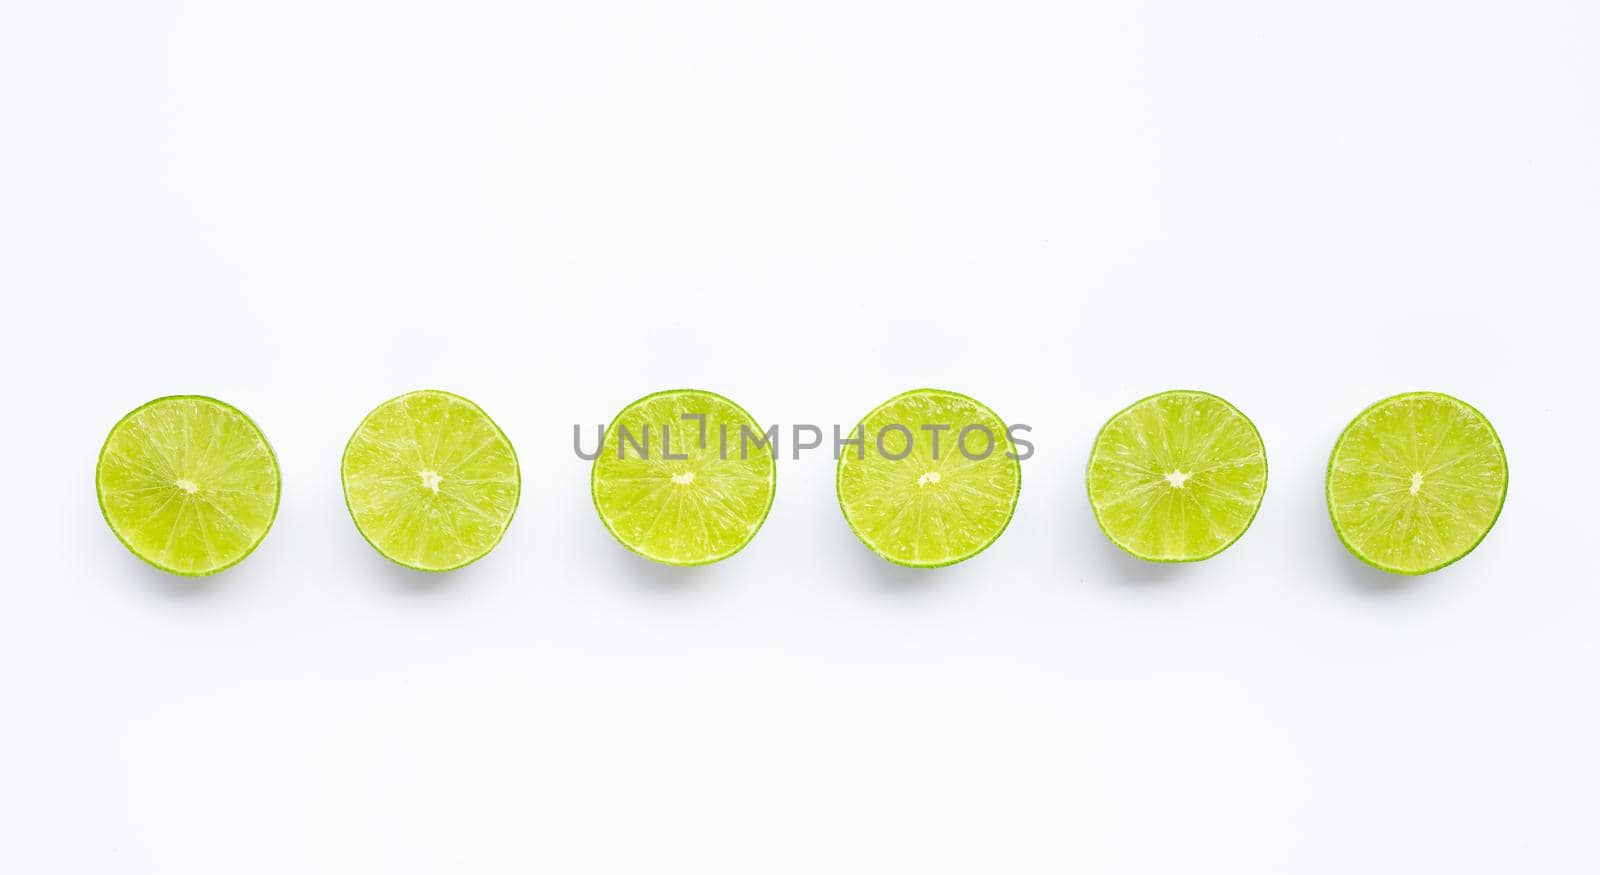 Limes isolated on white background.